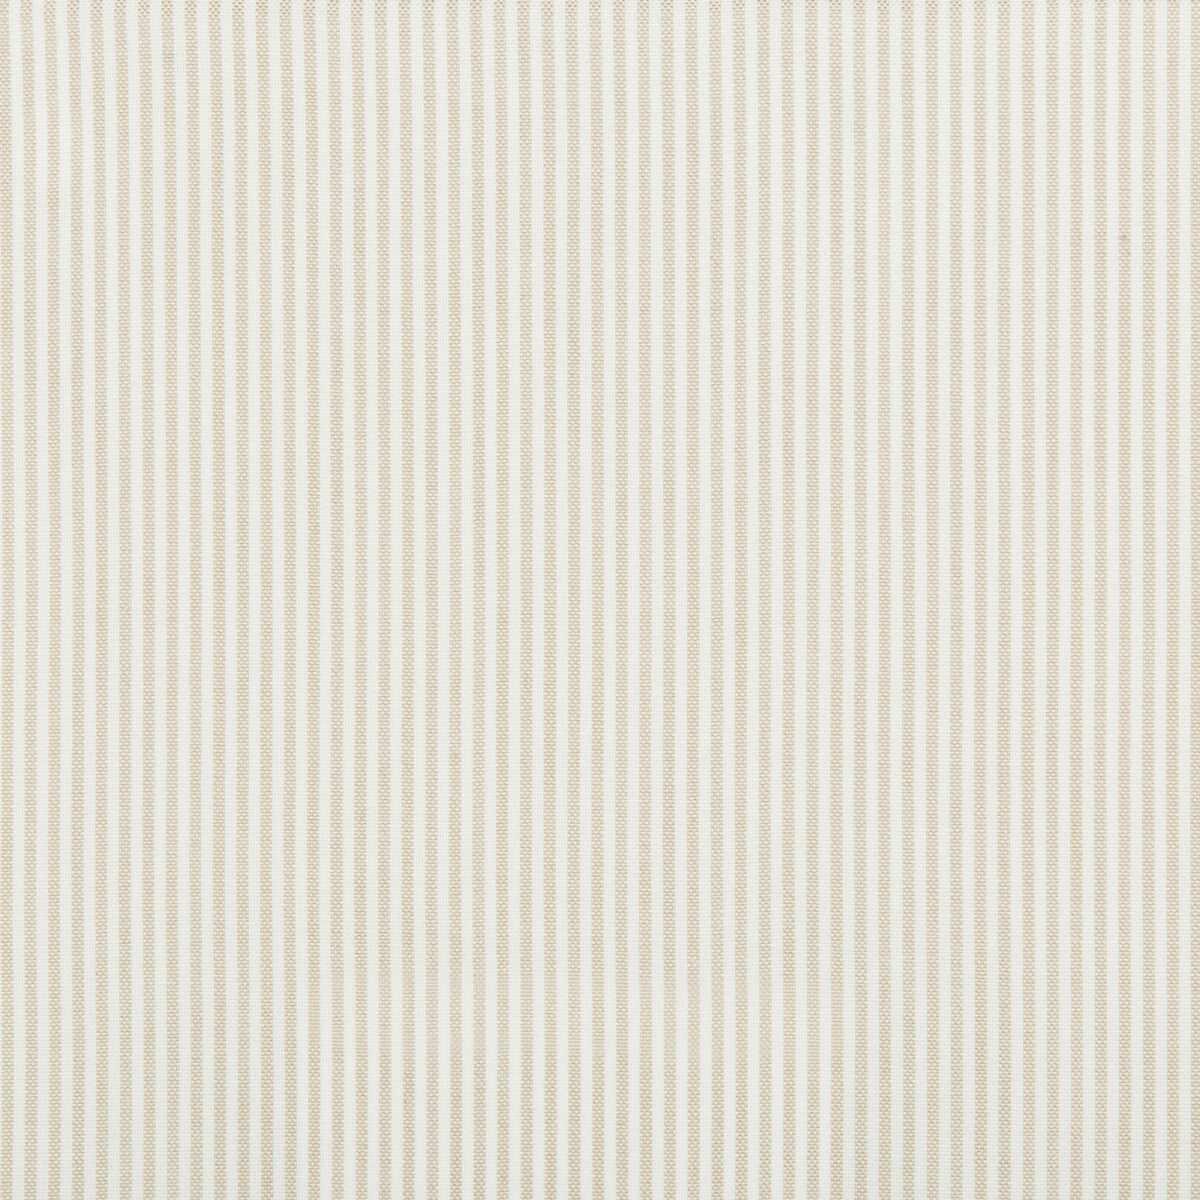 Kravet Basics fabric in 35374-16 color - pattern 35374.16.0 - by Kravet Basics in the Performance Indoor Outdoor collection